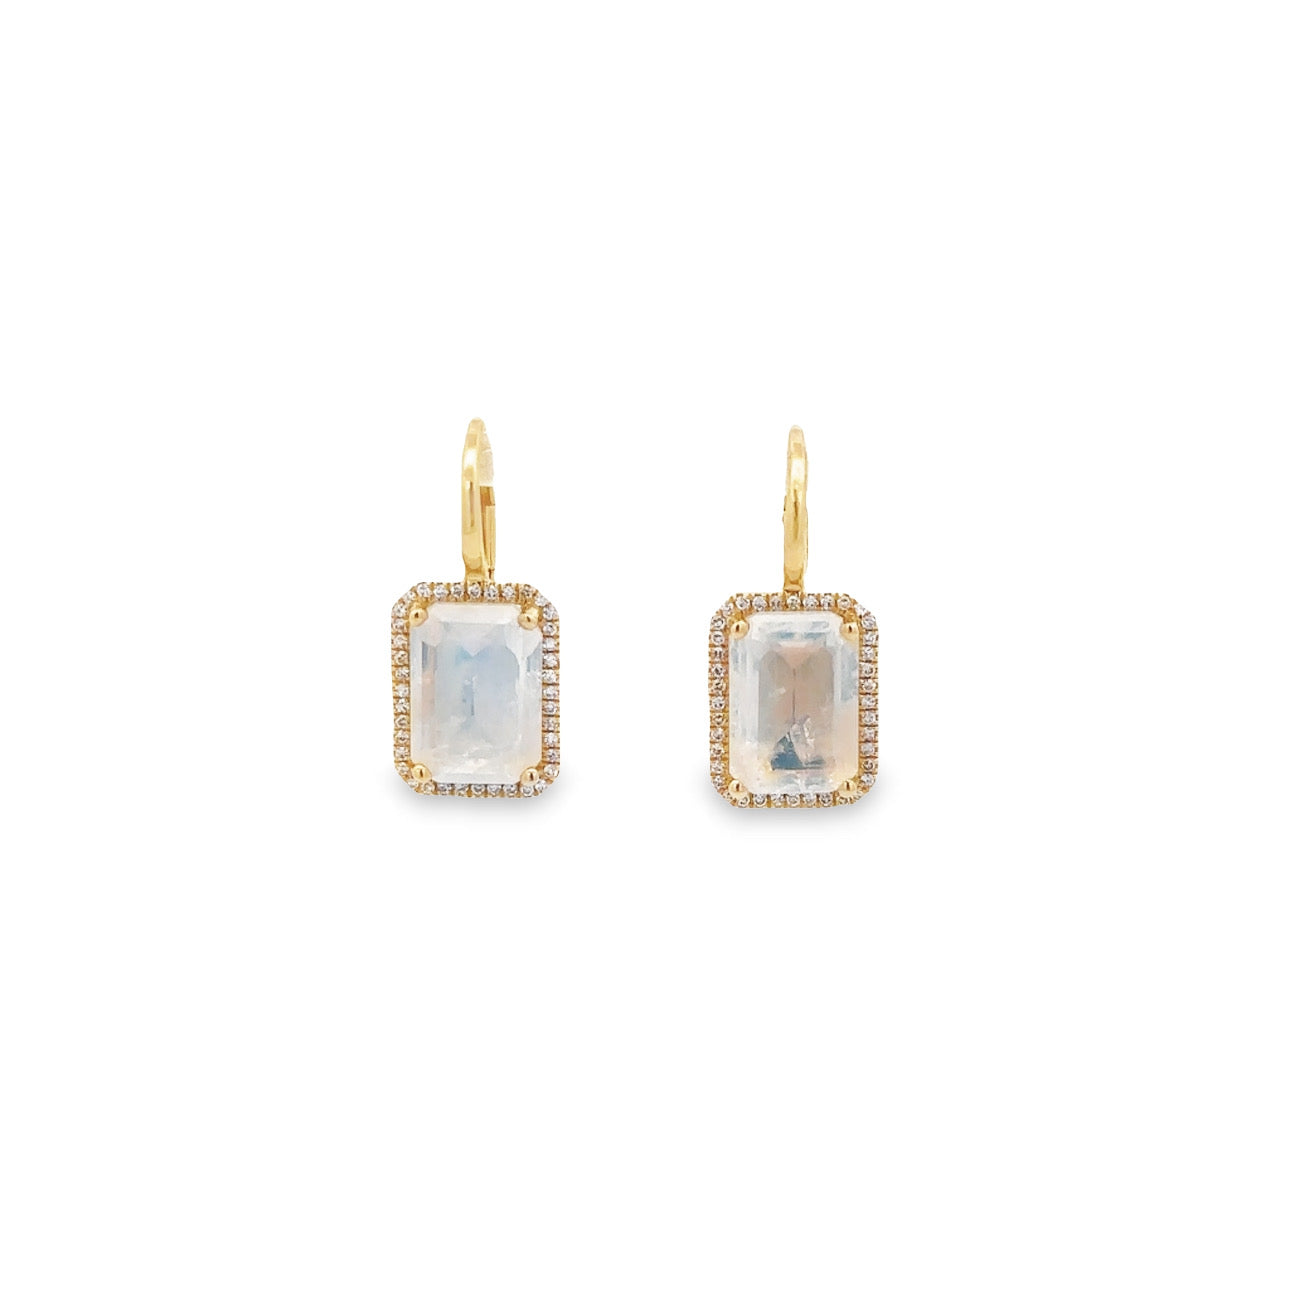 WD1239 14kt Gold Emerald Cut Moonstone Drop Earrings with Diamond Halo Studs